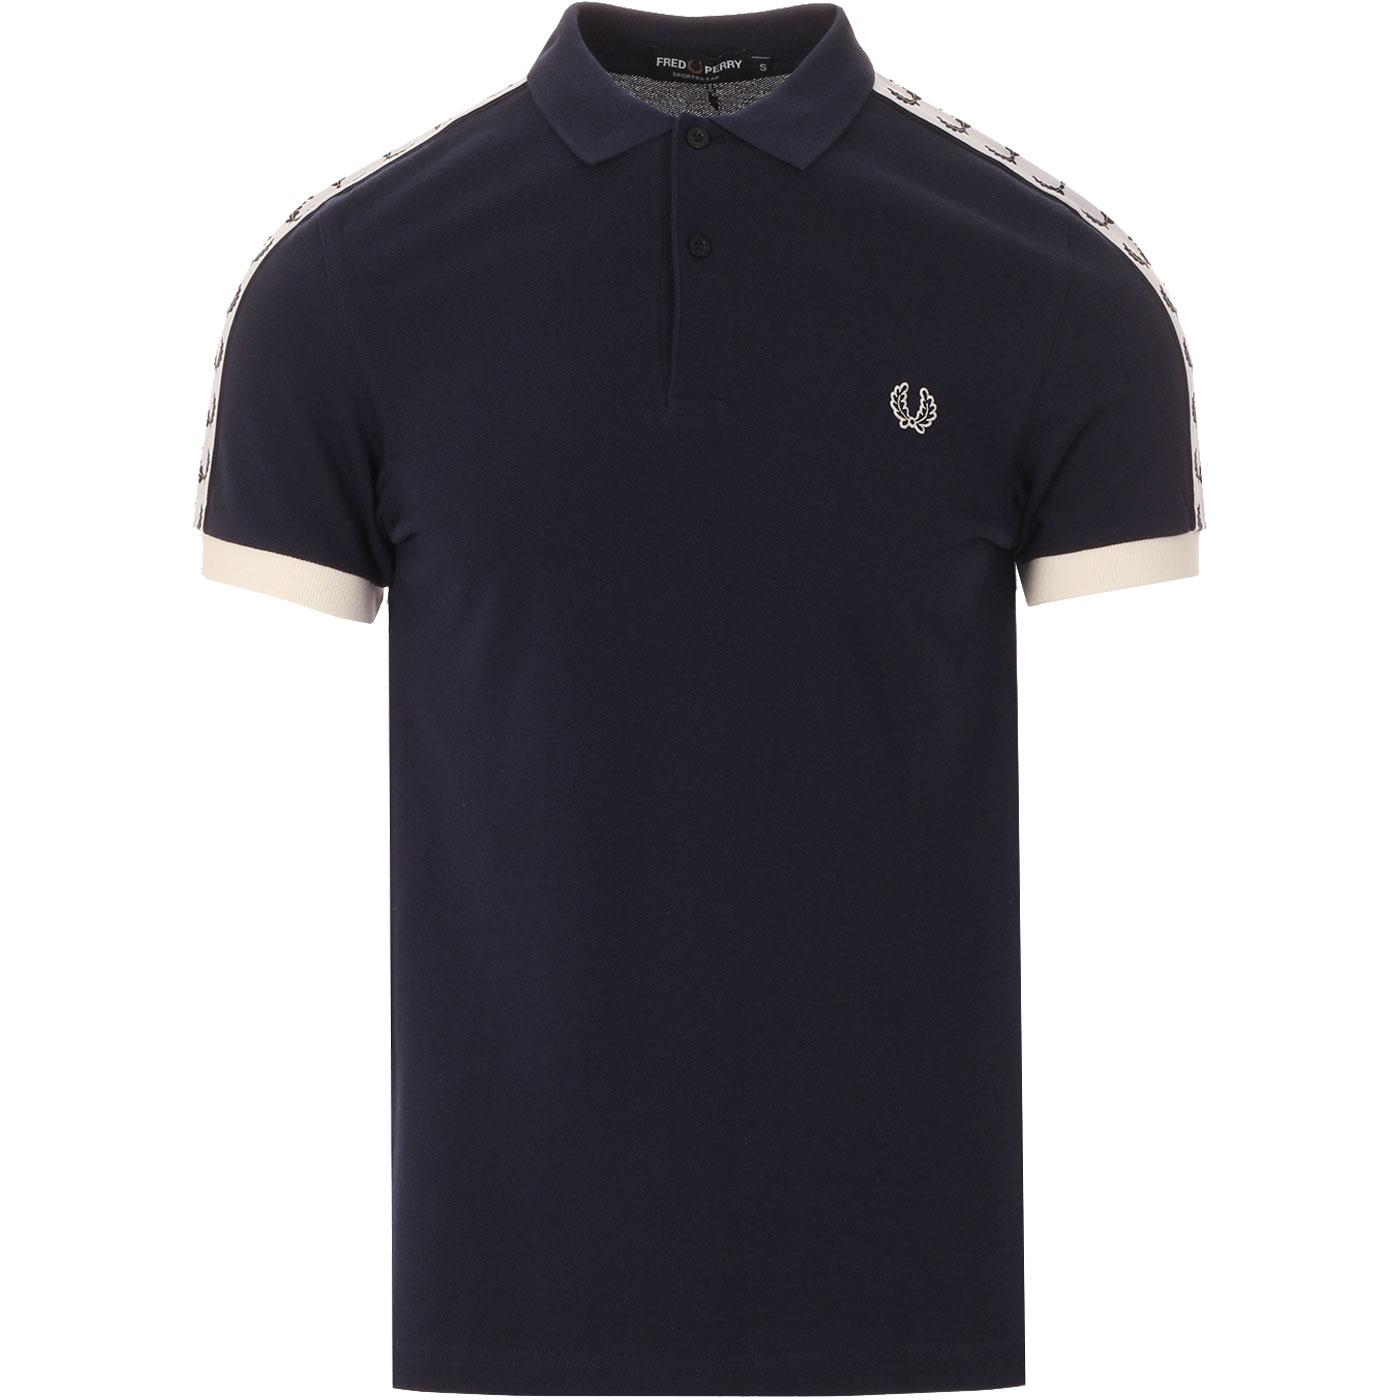 FRED PERRY Mod Sports Tape Sleeve Pique Polo CB